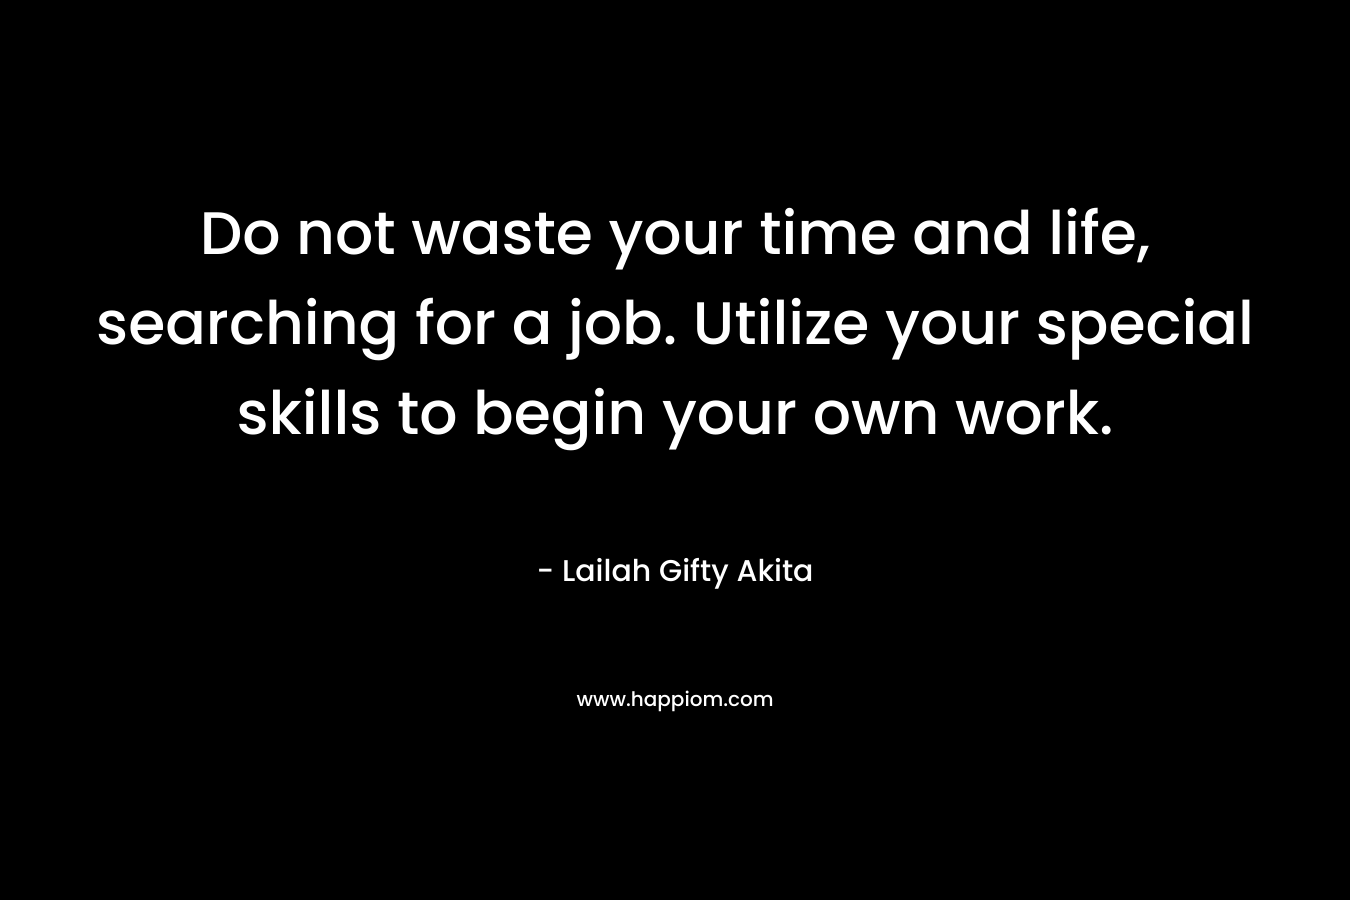 Do not waste your time and life, searching for a job. Utilize your special skills to begin your own work.